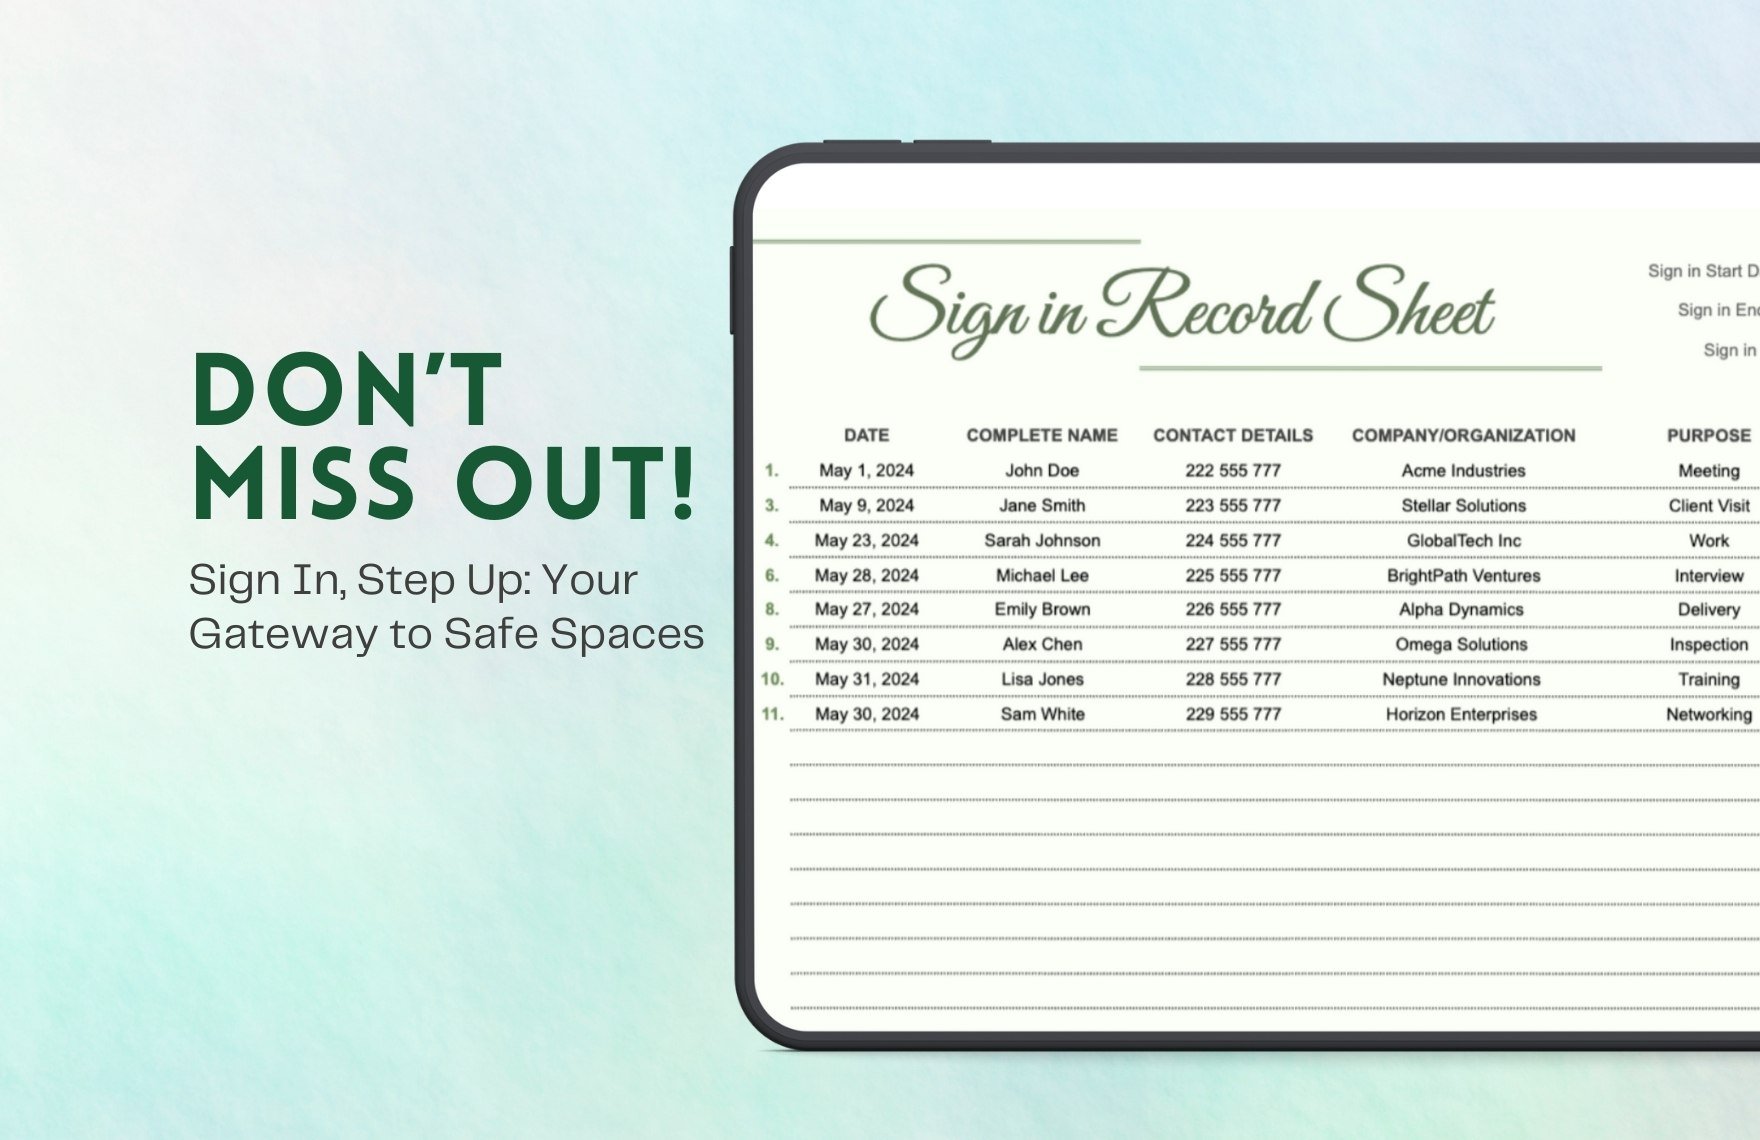 Sign in Record Sheet Template